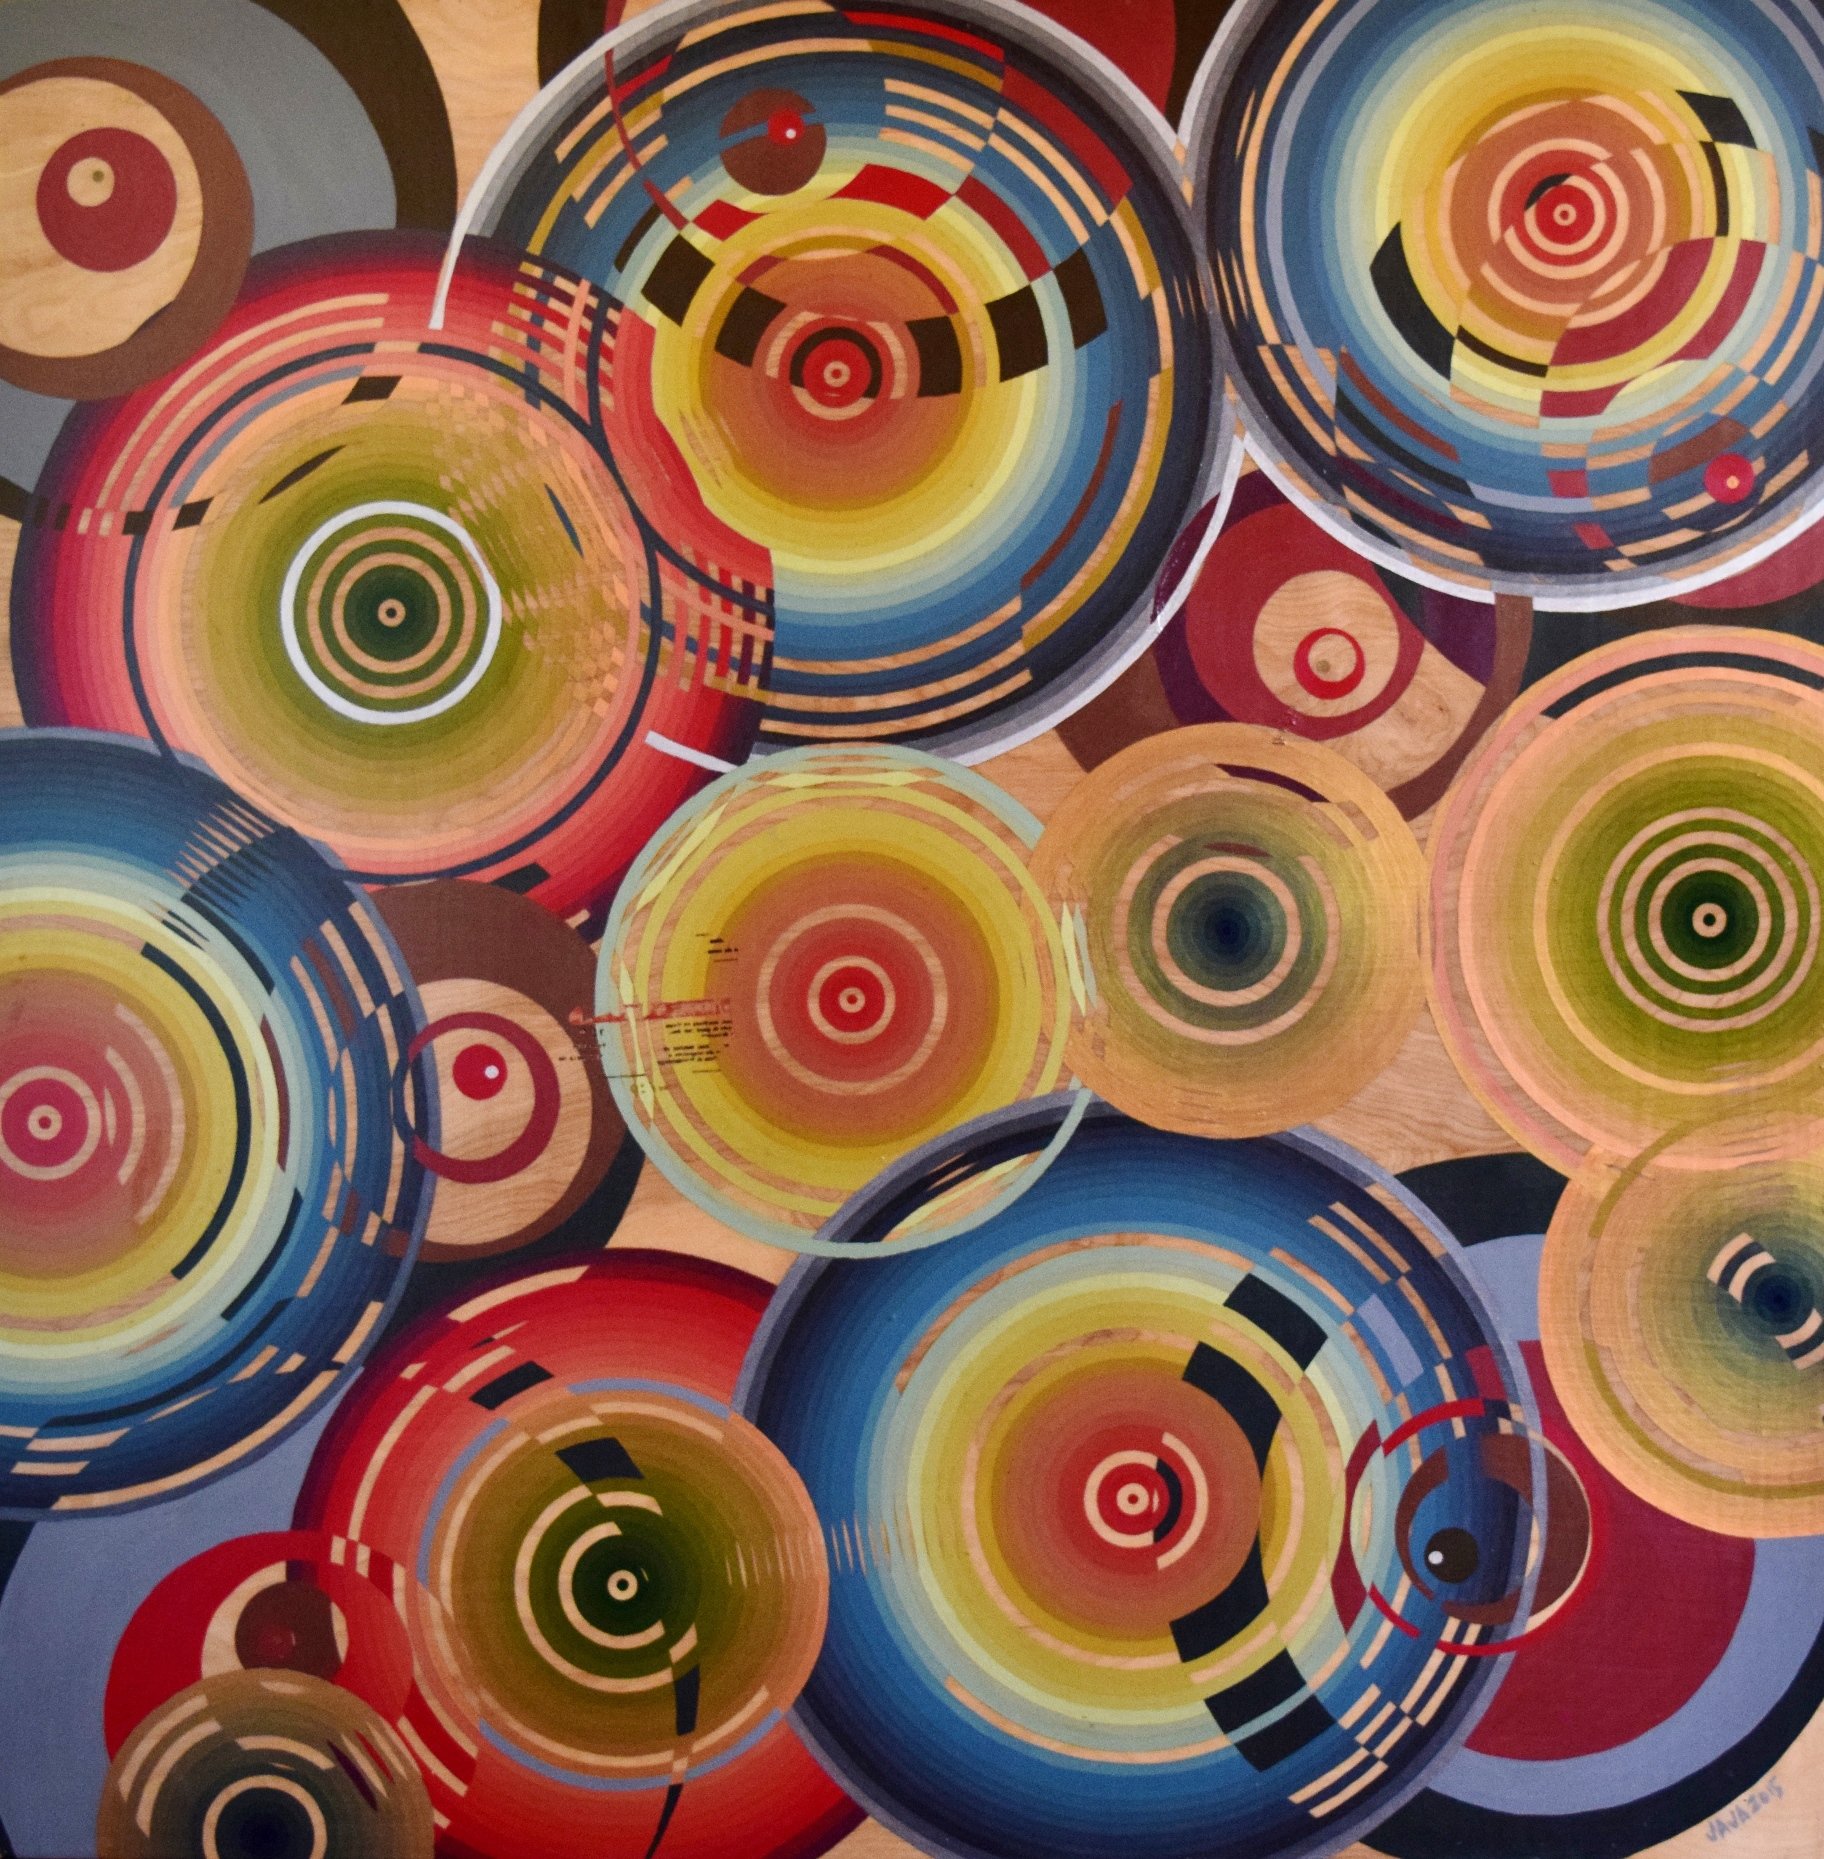 Jaja Dario; Exodus, 2015, Original Painting Acrylic, 48 x 48 inches. Artwork description: 241 Open your eyes and look within.  Are you satisfied with the life youre living abstract acrylic painting, abstract art, visual art, visual music, music, circles, spheres, contemporary art, painting on wood...